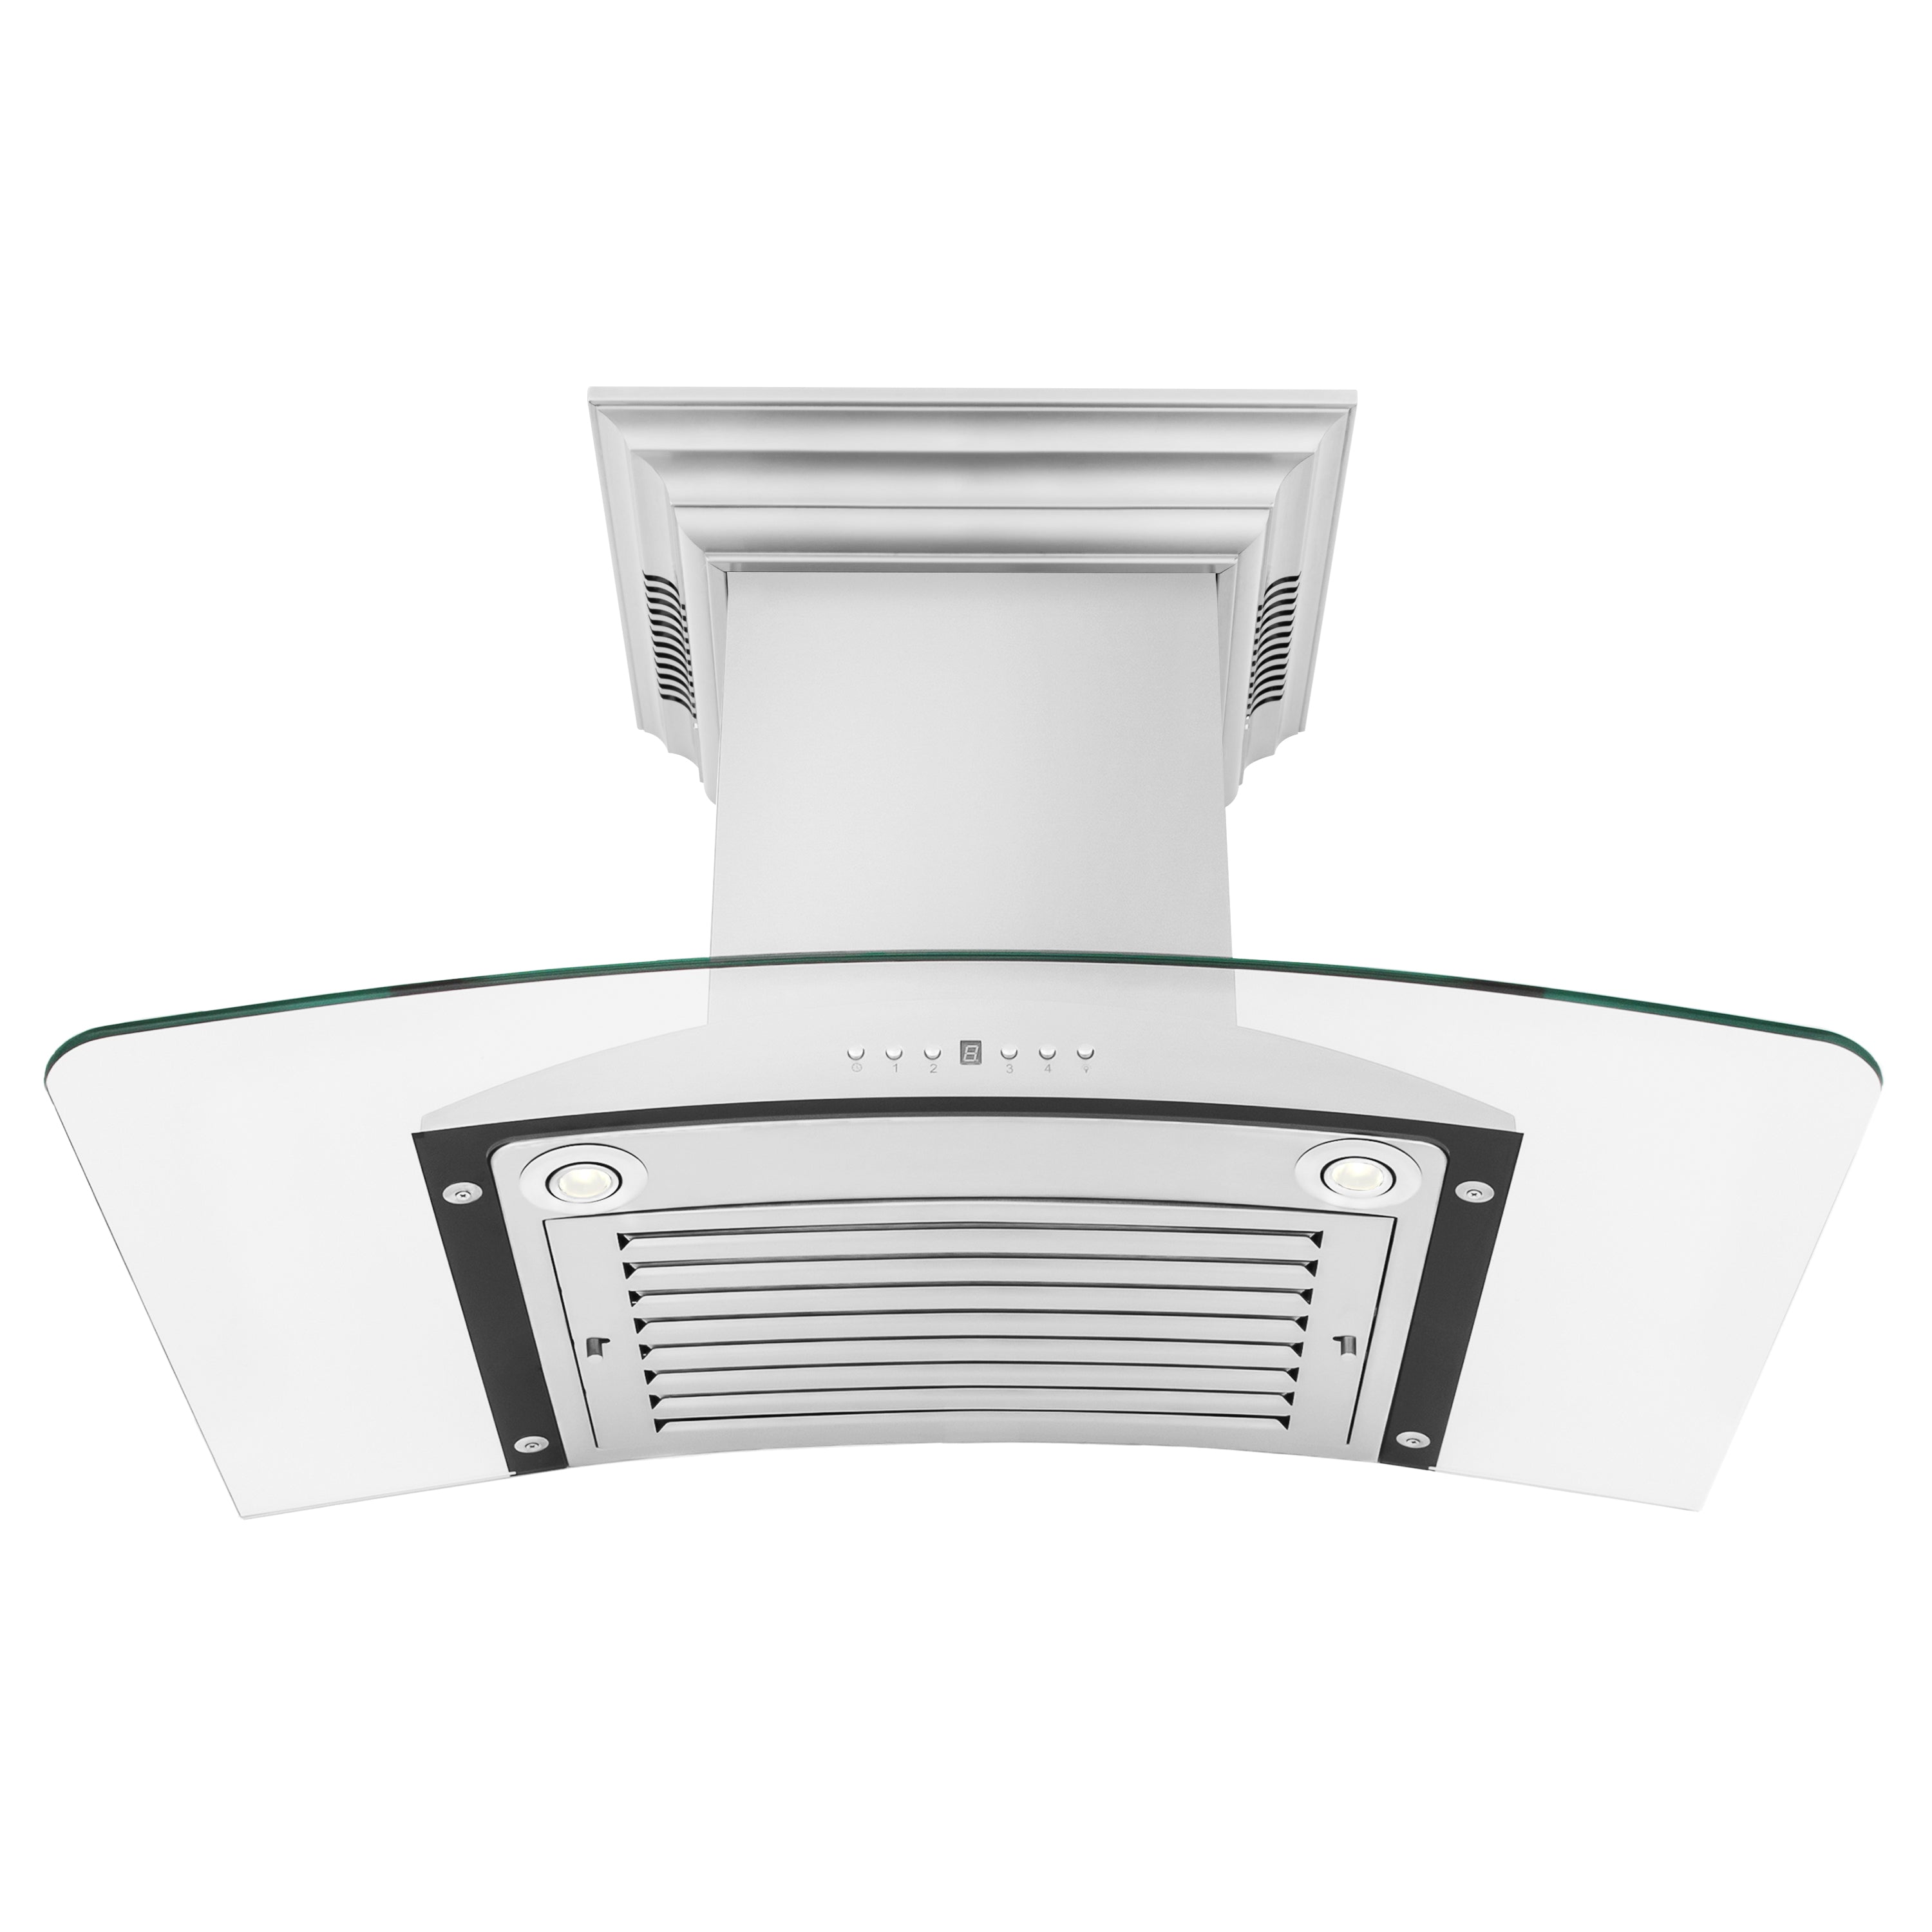 36" ZLINE CrownSound‚ Ducted Vent Wall Mount Range Hood in Stainless Steel with Built-in Bluetooth Speakers (KNCRN-BT-36)